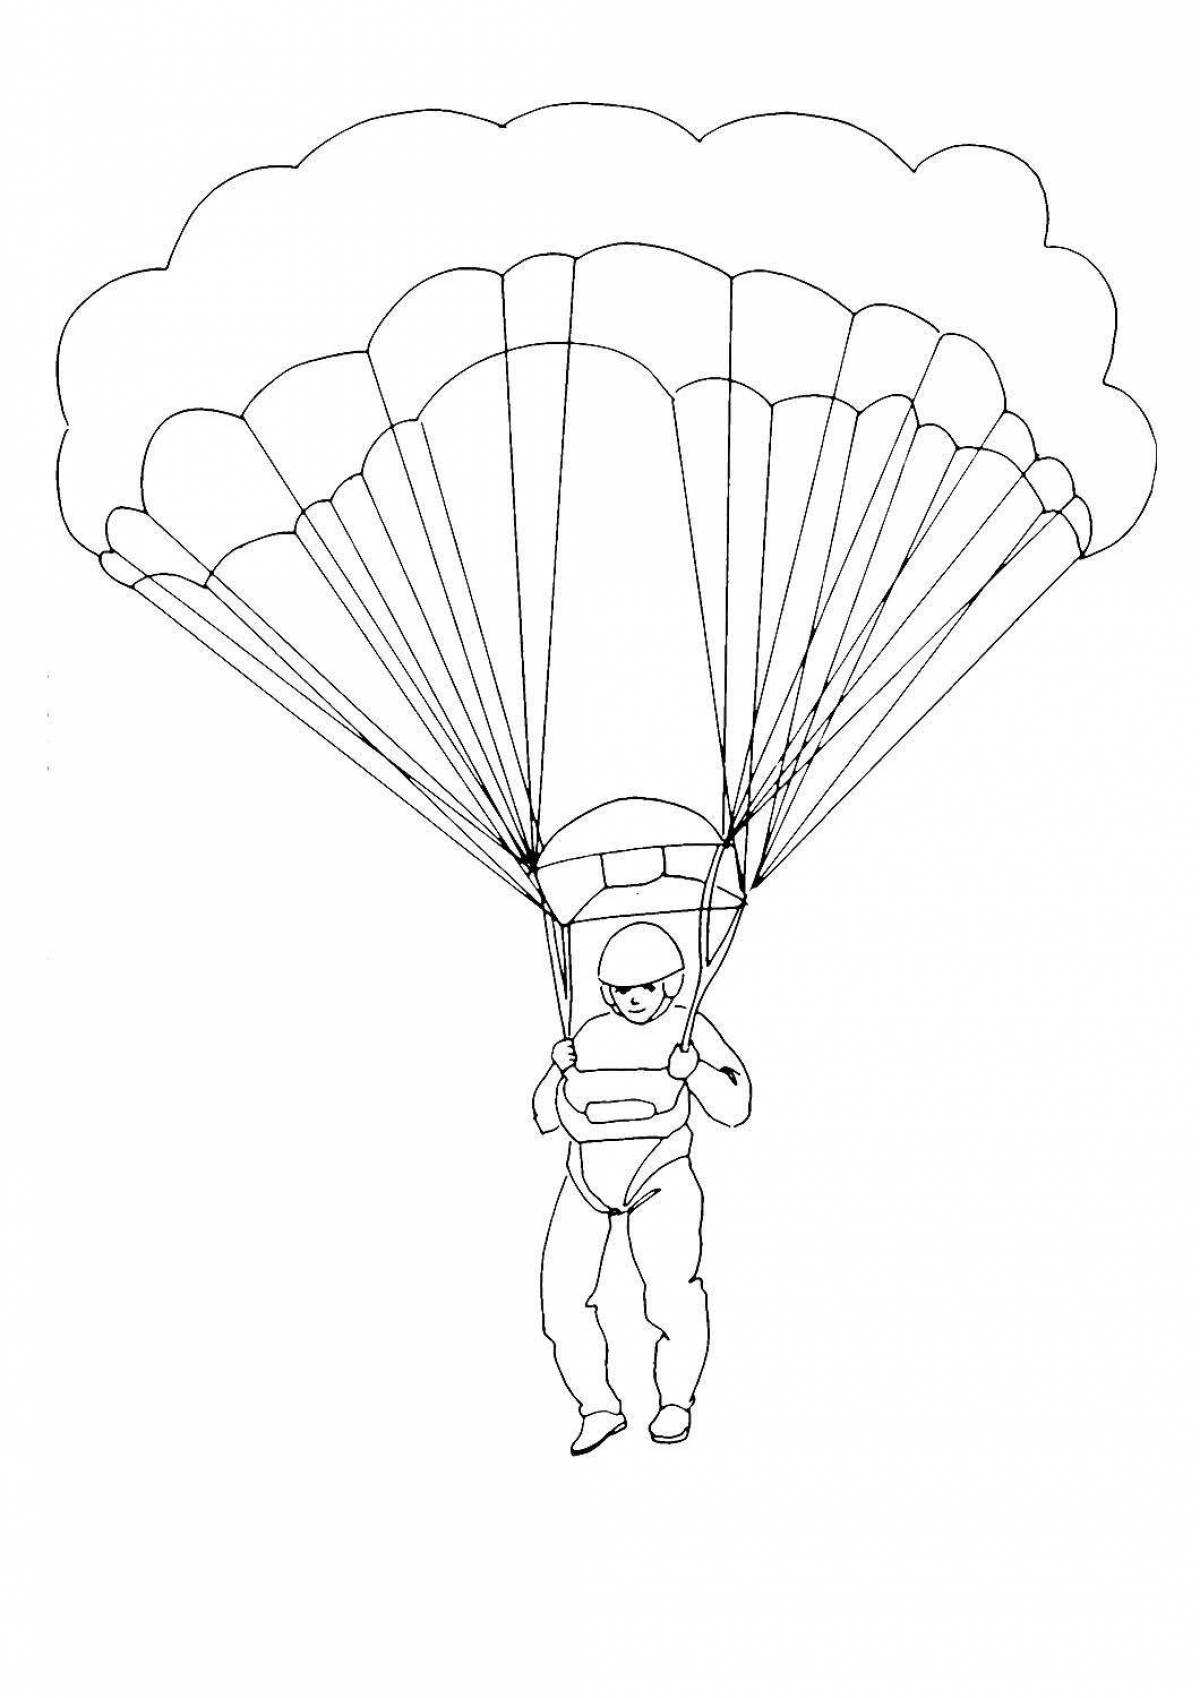 Charming paratrooper coloring page